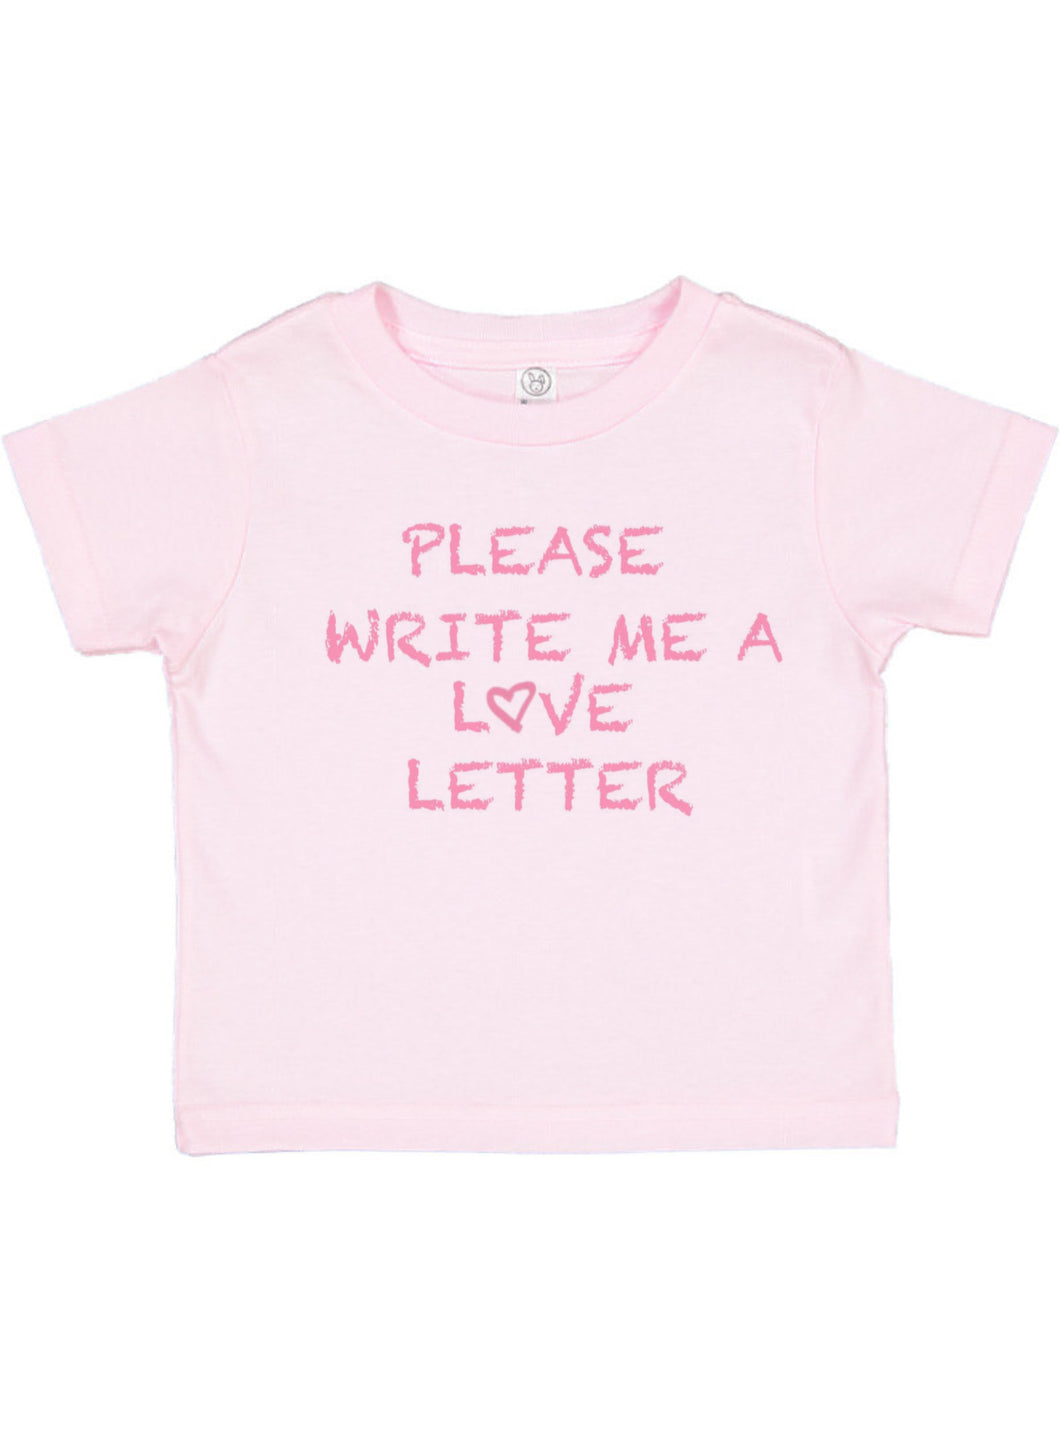 Please Write Me a Love Letter Tee - Pink